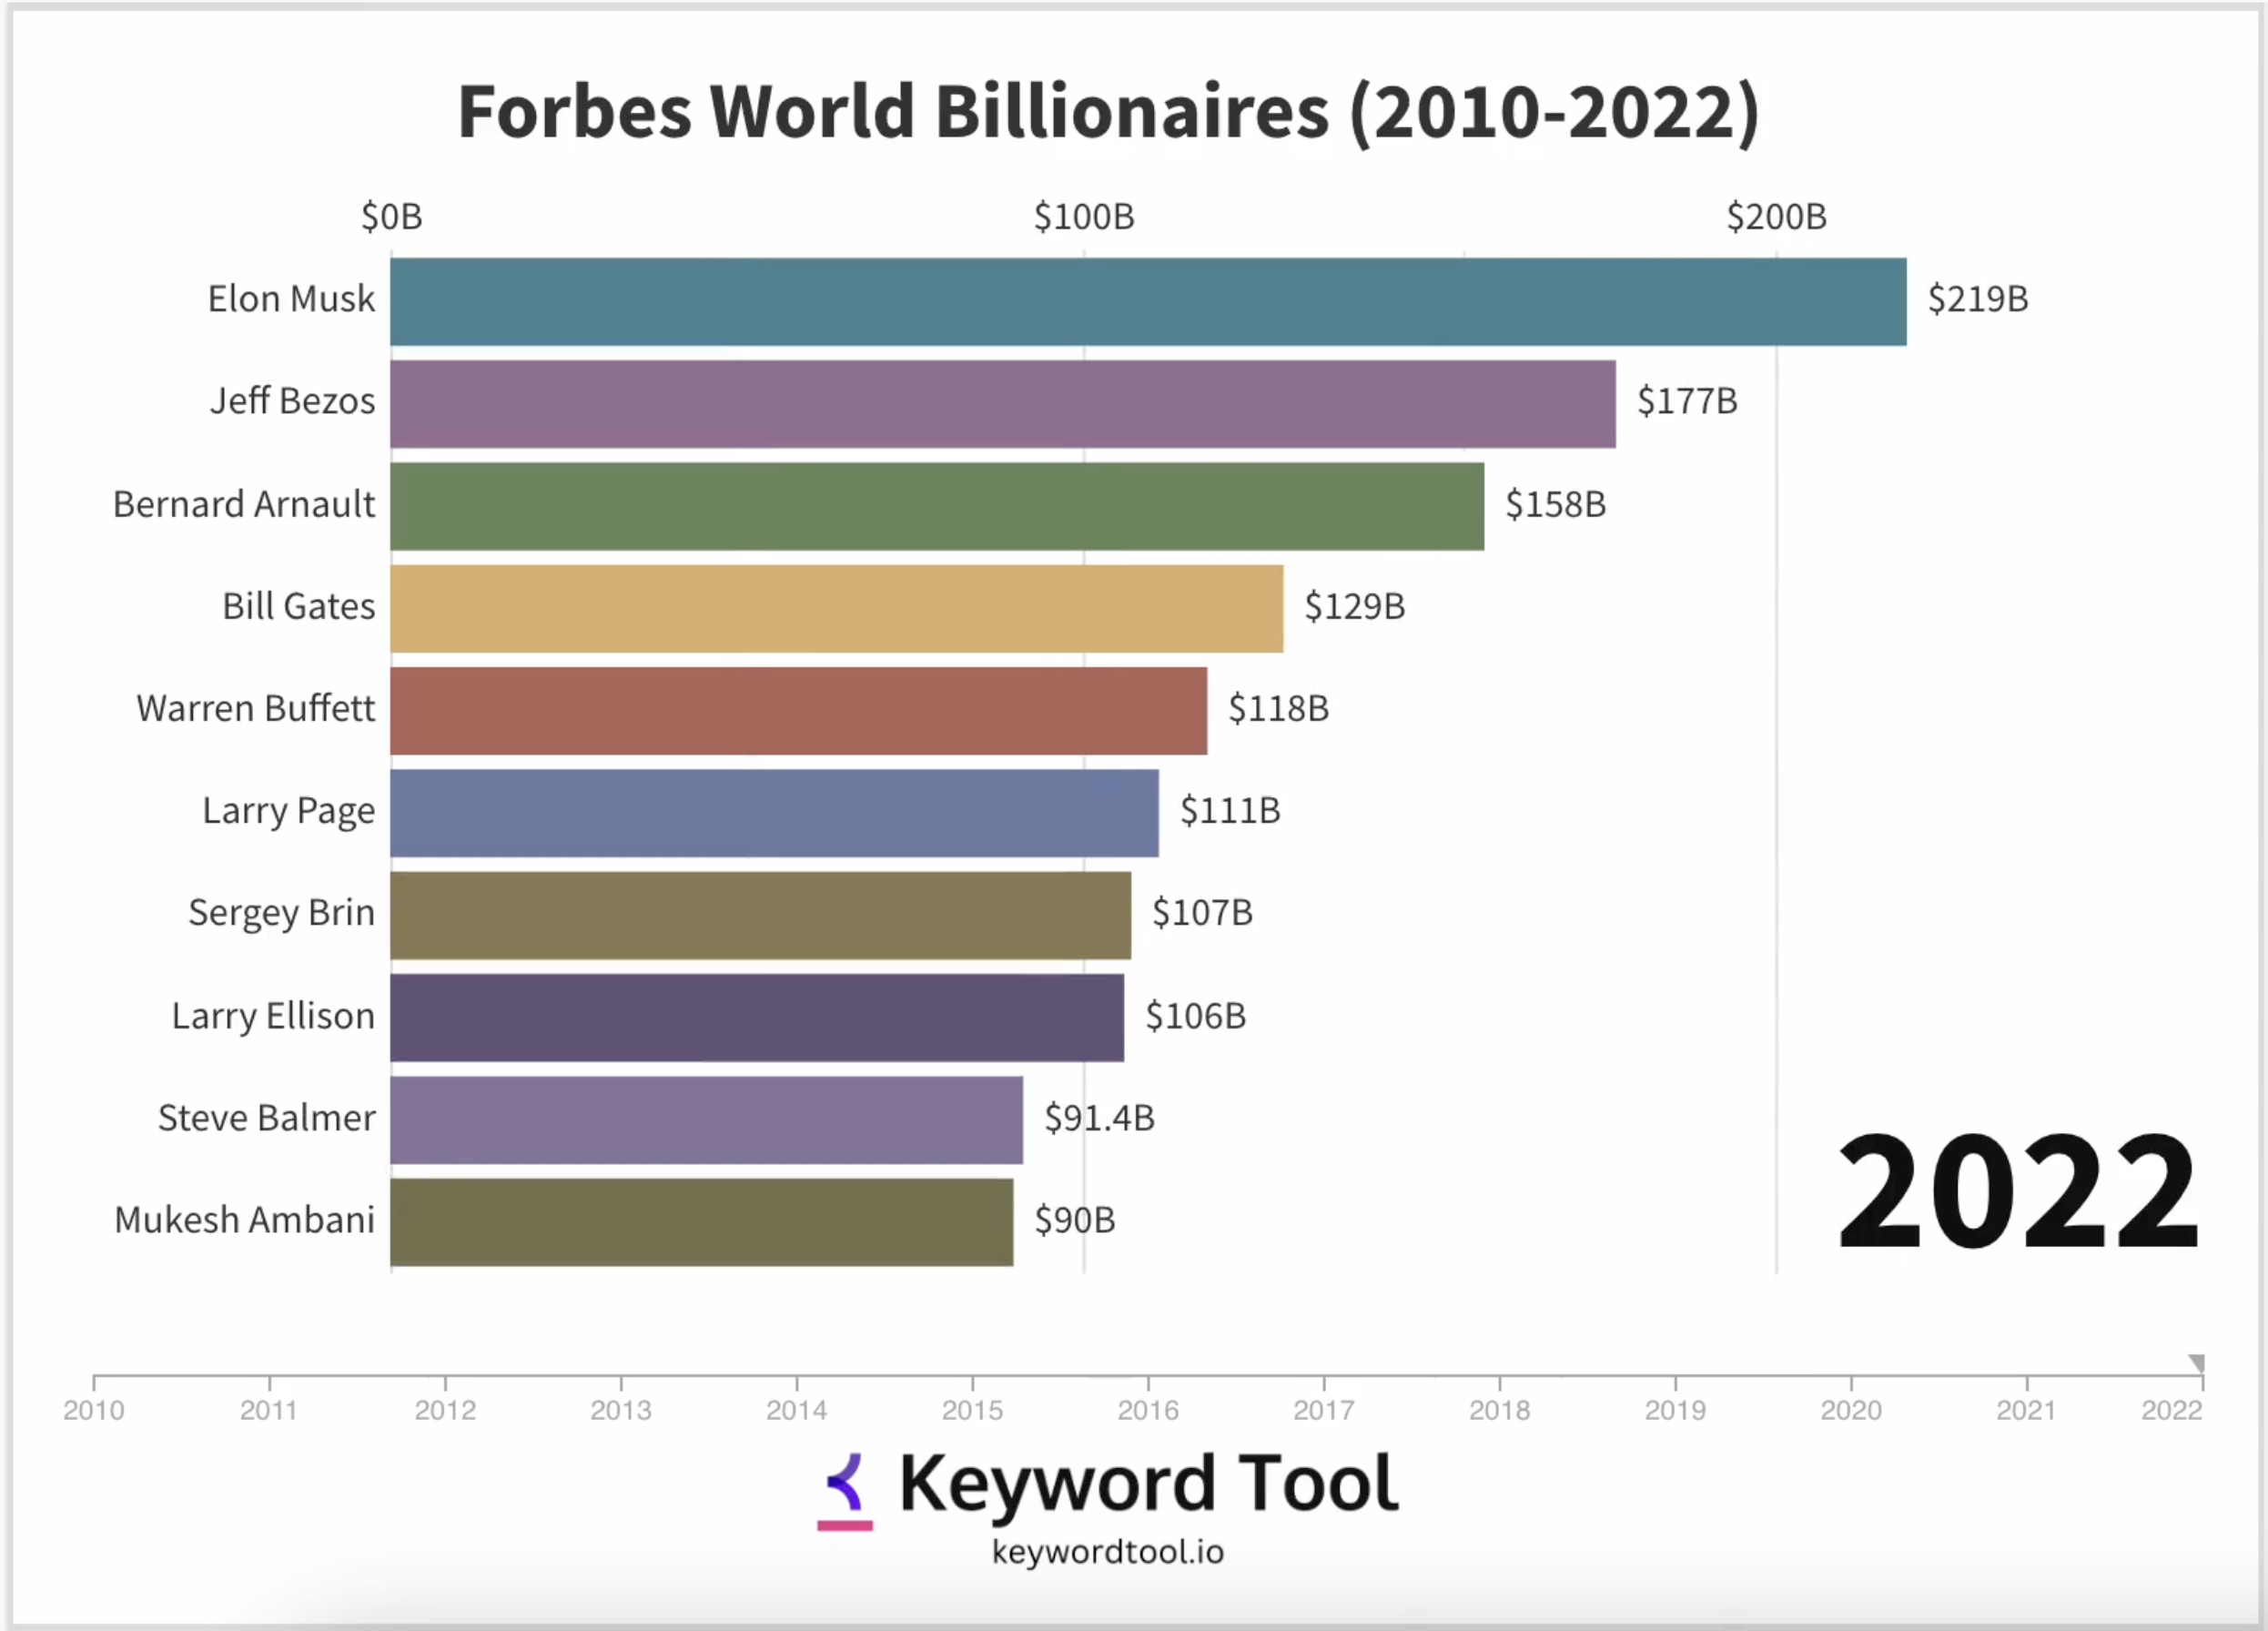 Who Is The Richest Person In The World In 2023?  Top 10 Richest People In  The World - Forbes India